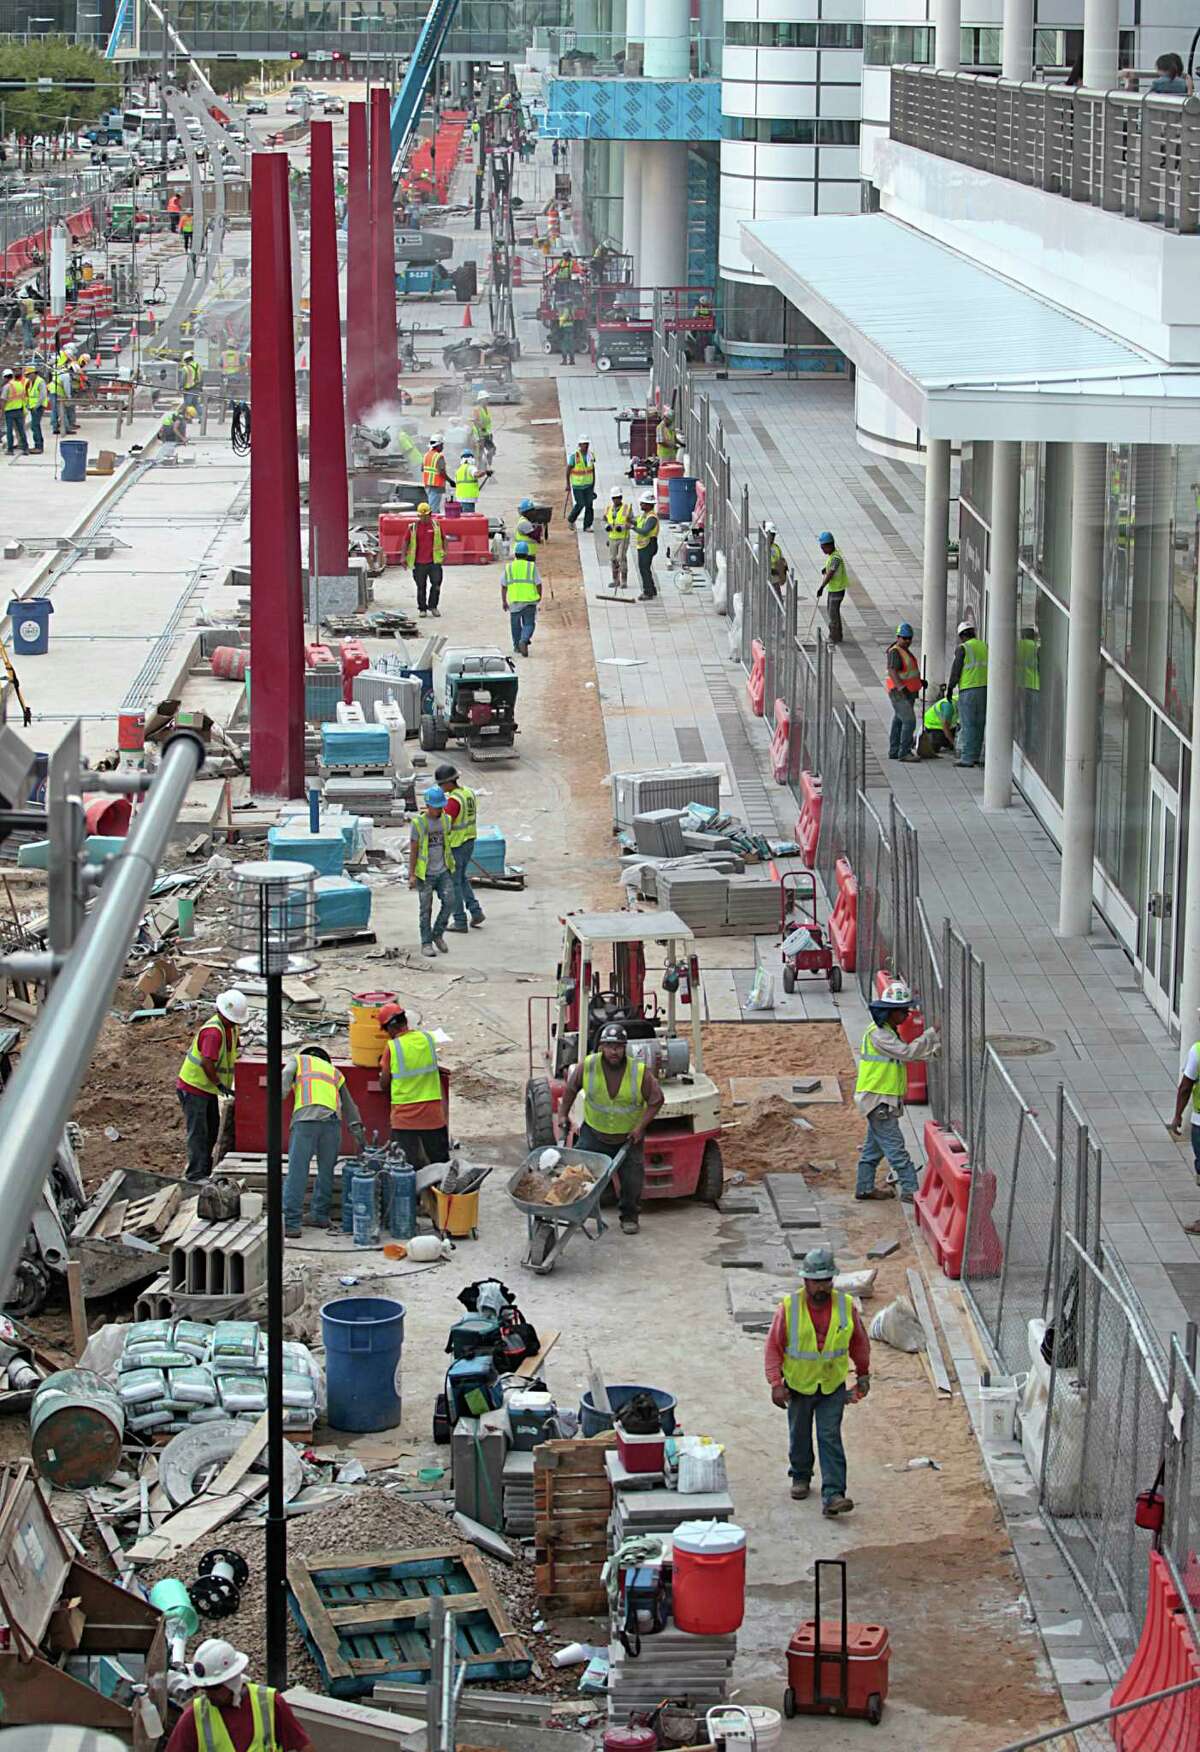 With 100 days before Super Bowl LI, construction crews stayed busy Friday with, among other projects, upgrades to the George R. Brown Convention Center.